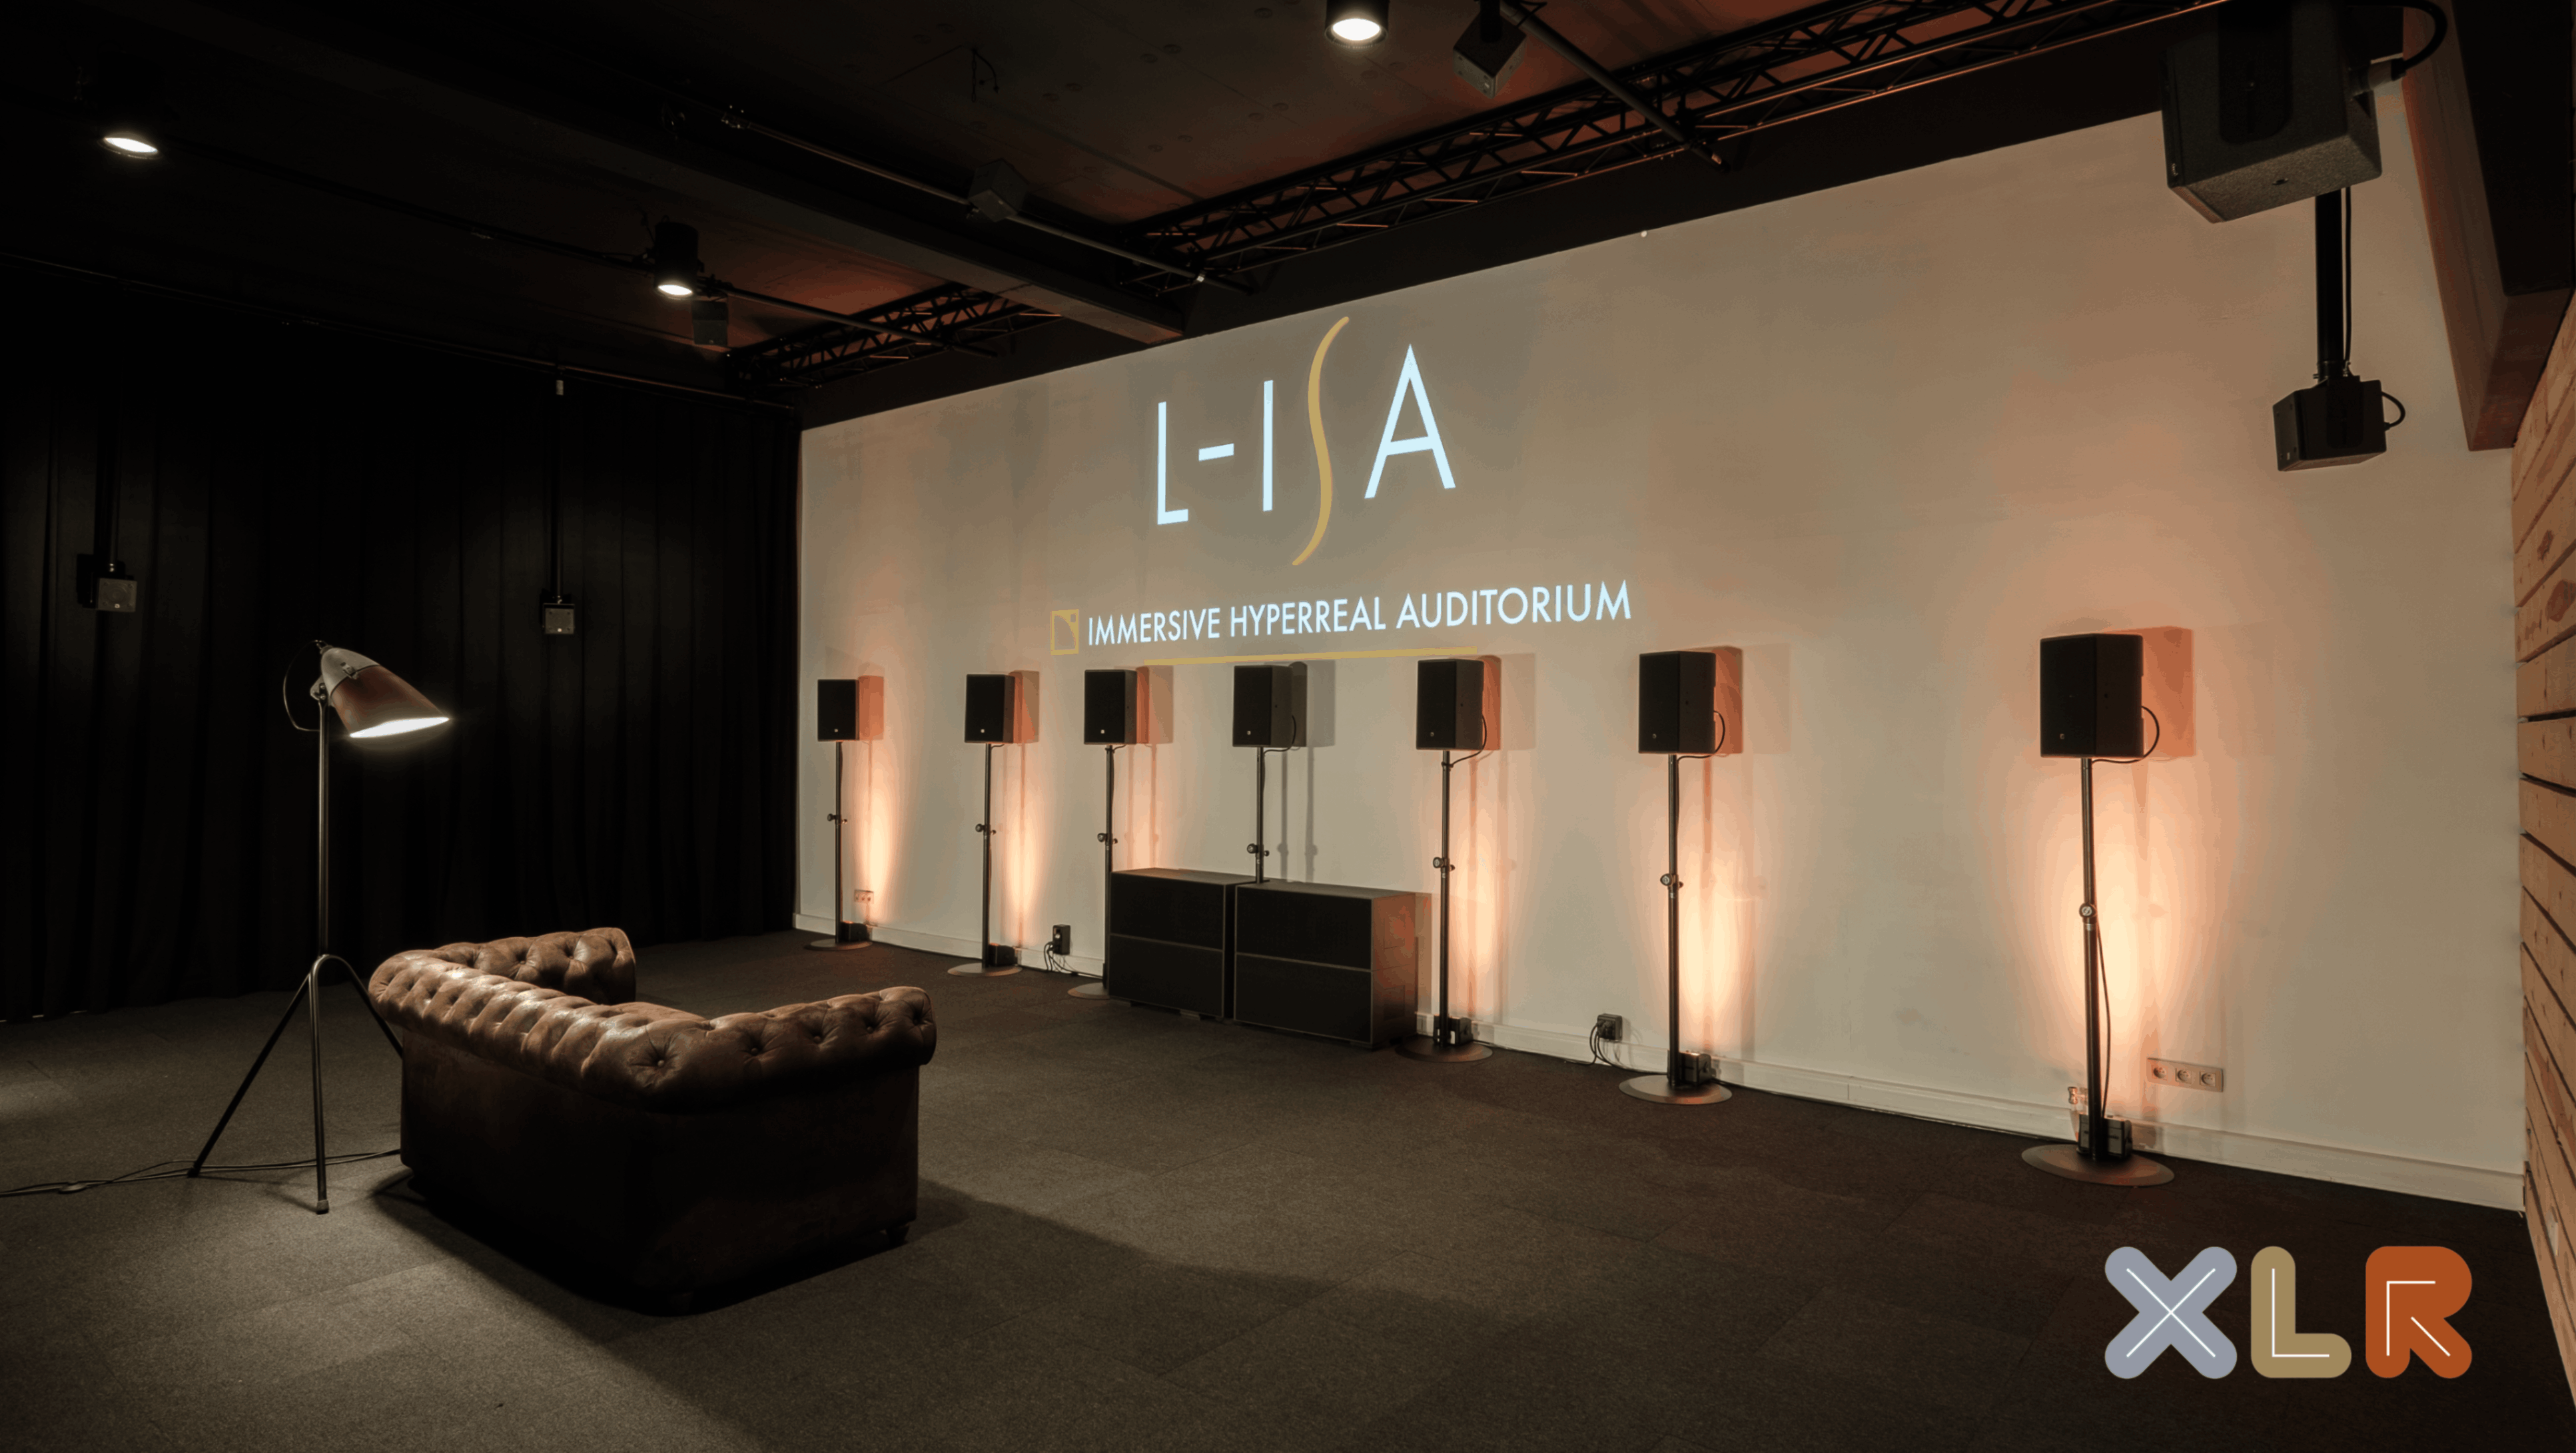 L-ISA Immersive Hyperreal Experience Now Exclusively On Demo At XLR 1